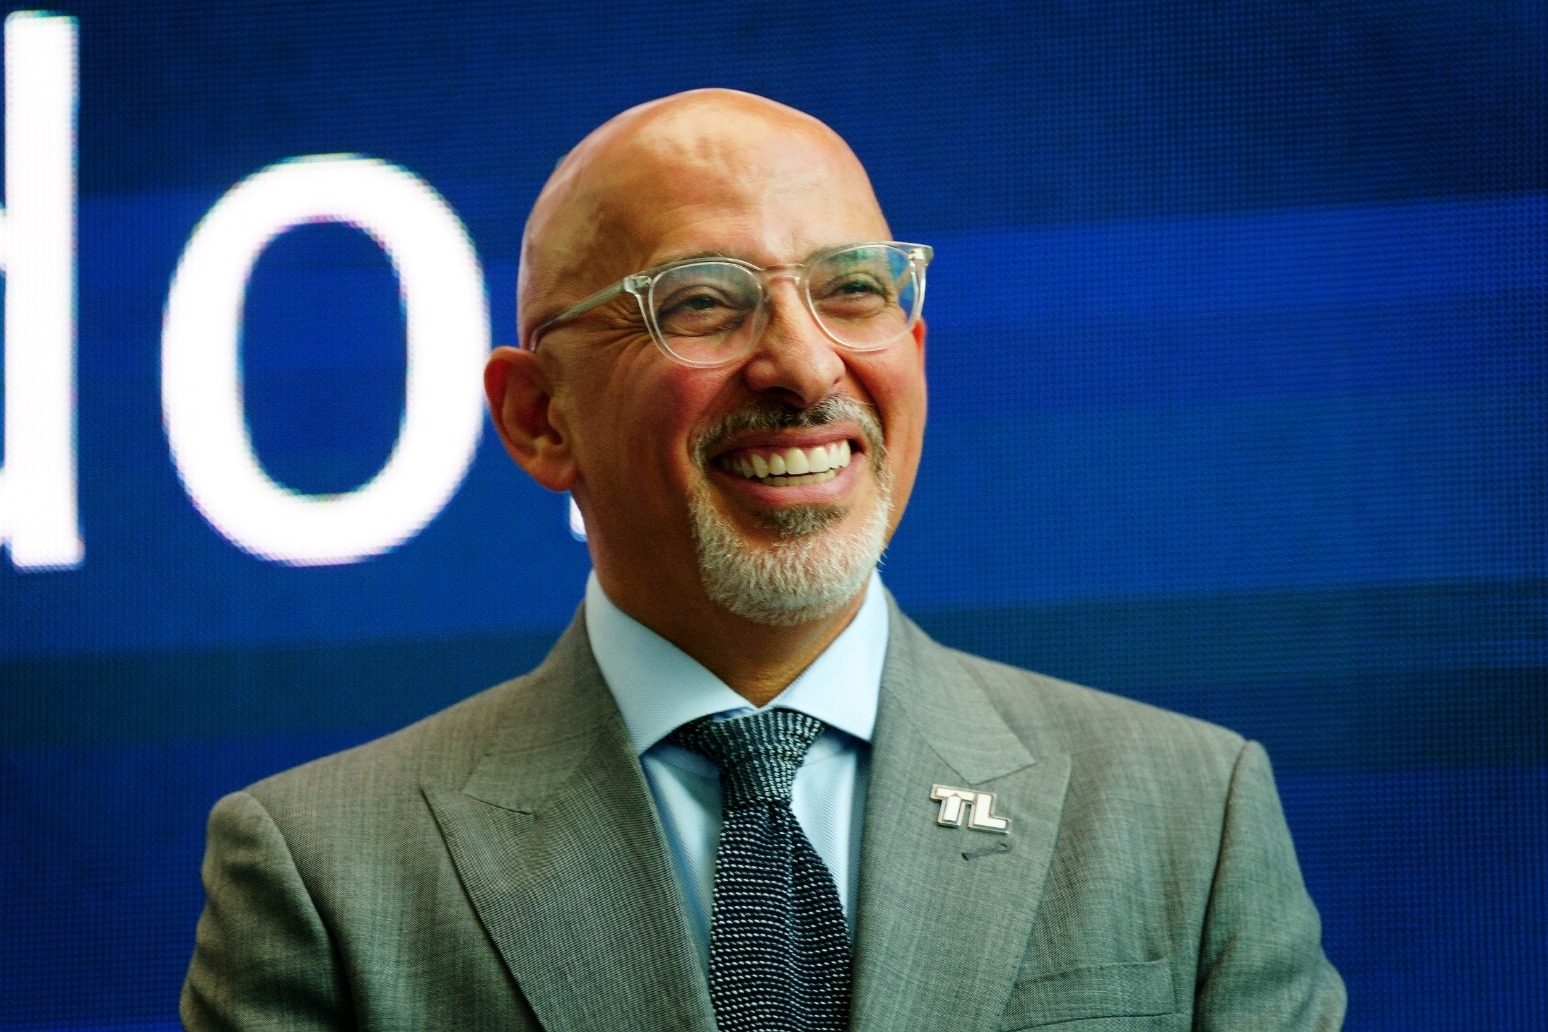 Teachers’ strike would be unfair after pandemic disruption, Nadhim Zahawi says 